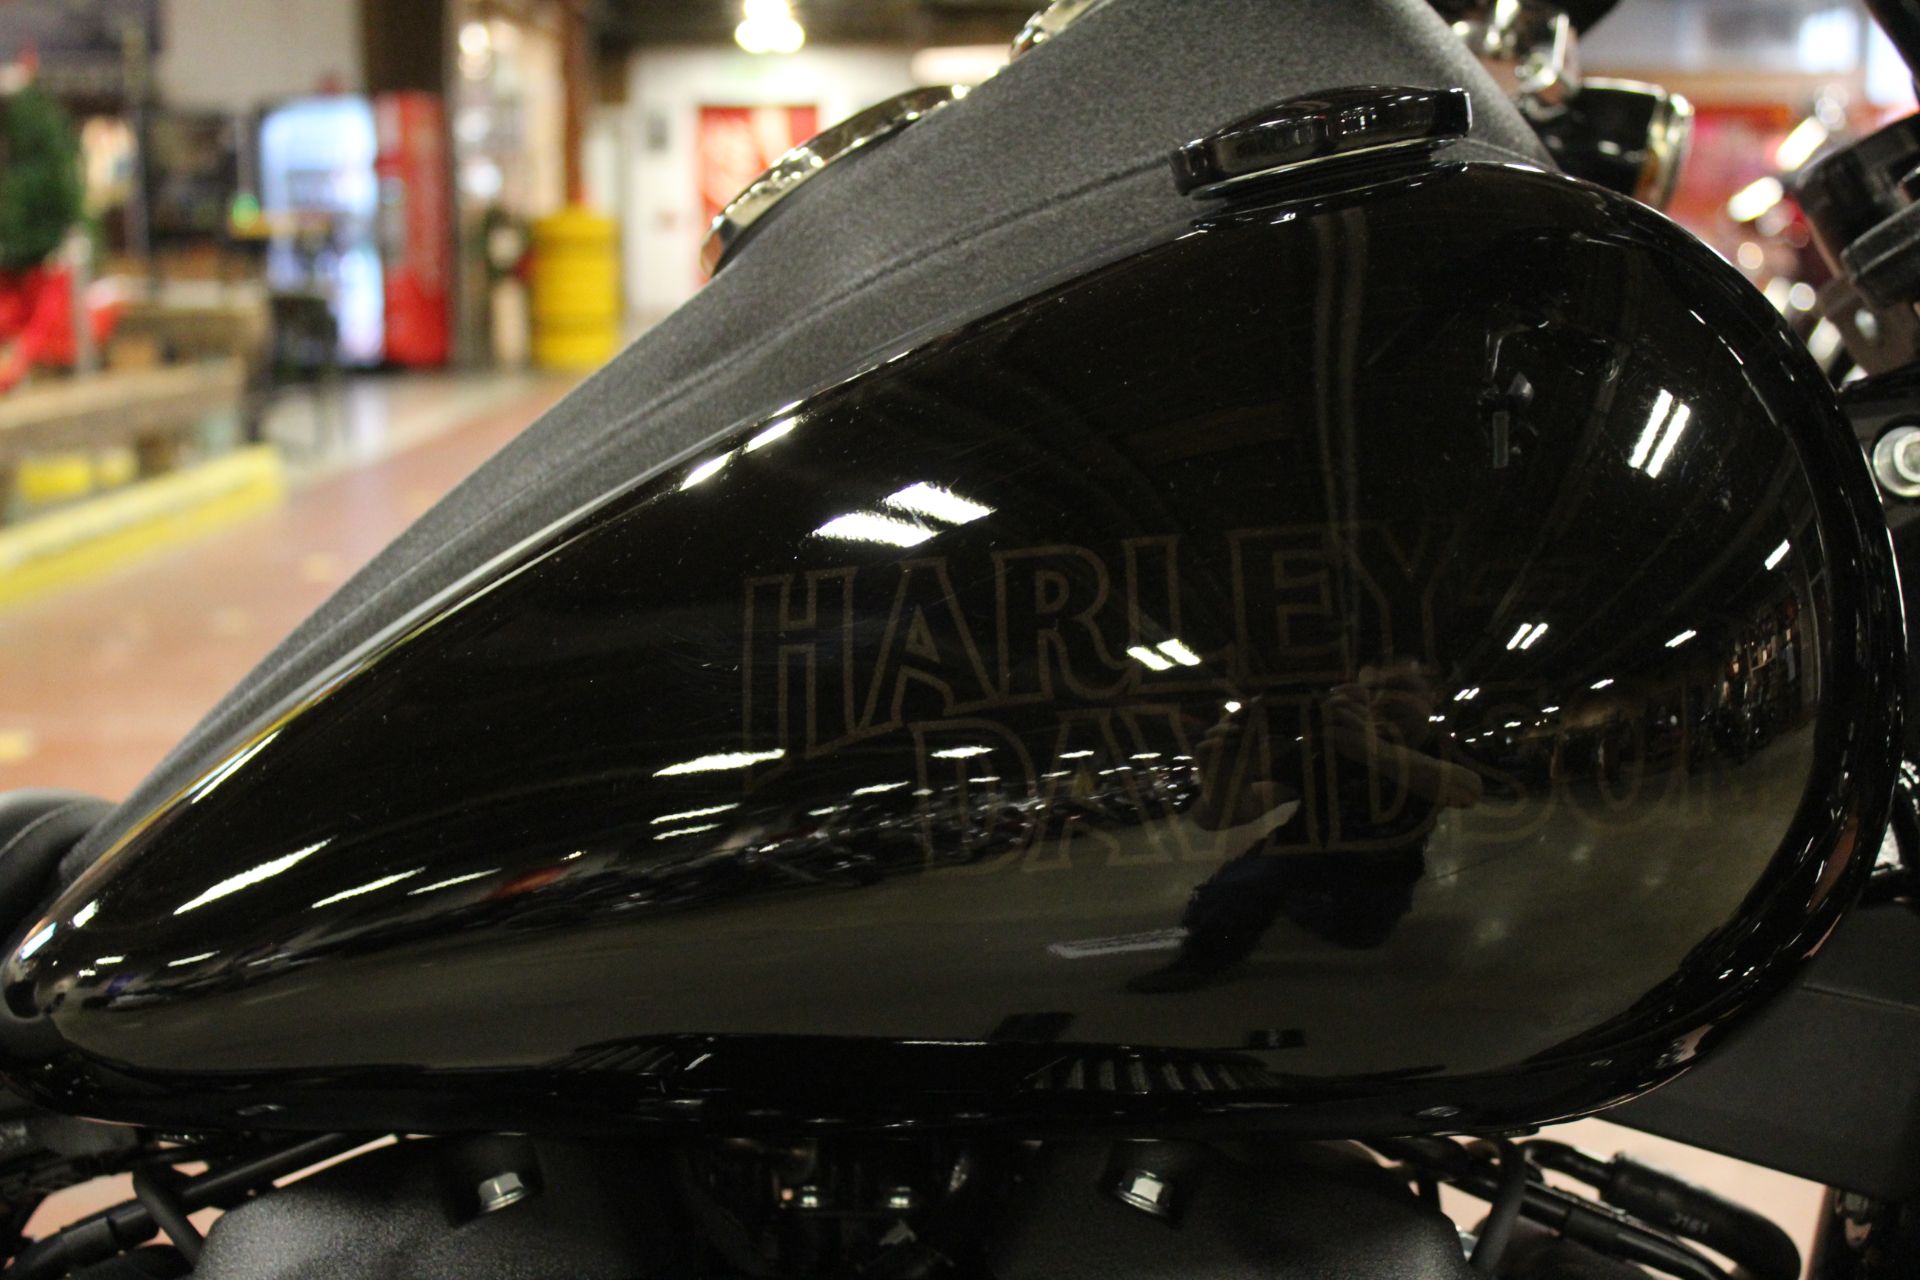 2021 Harley-Davidson Low Rider®S in New London, Connecticut - Photo 9